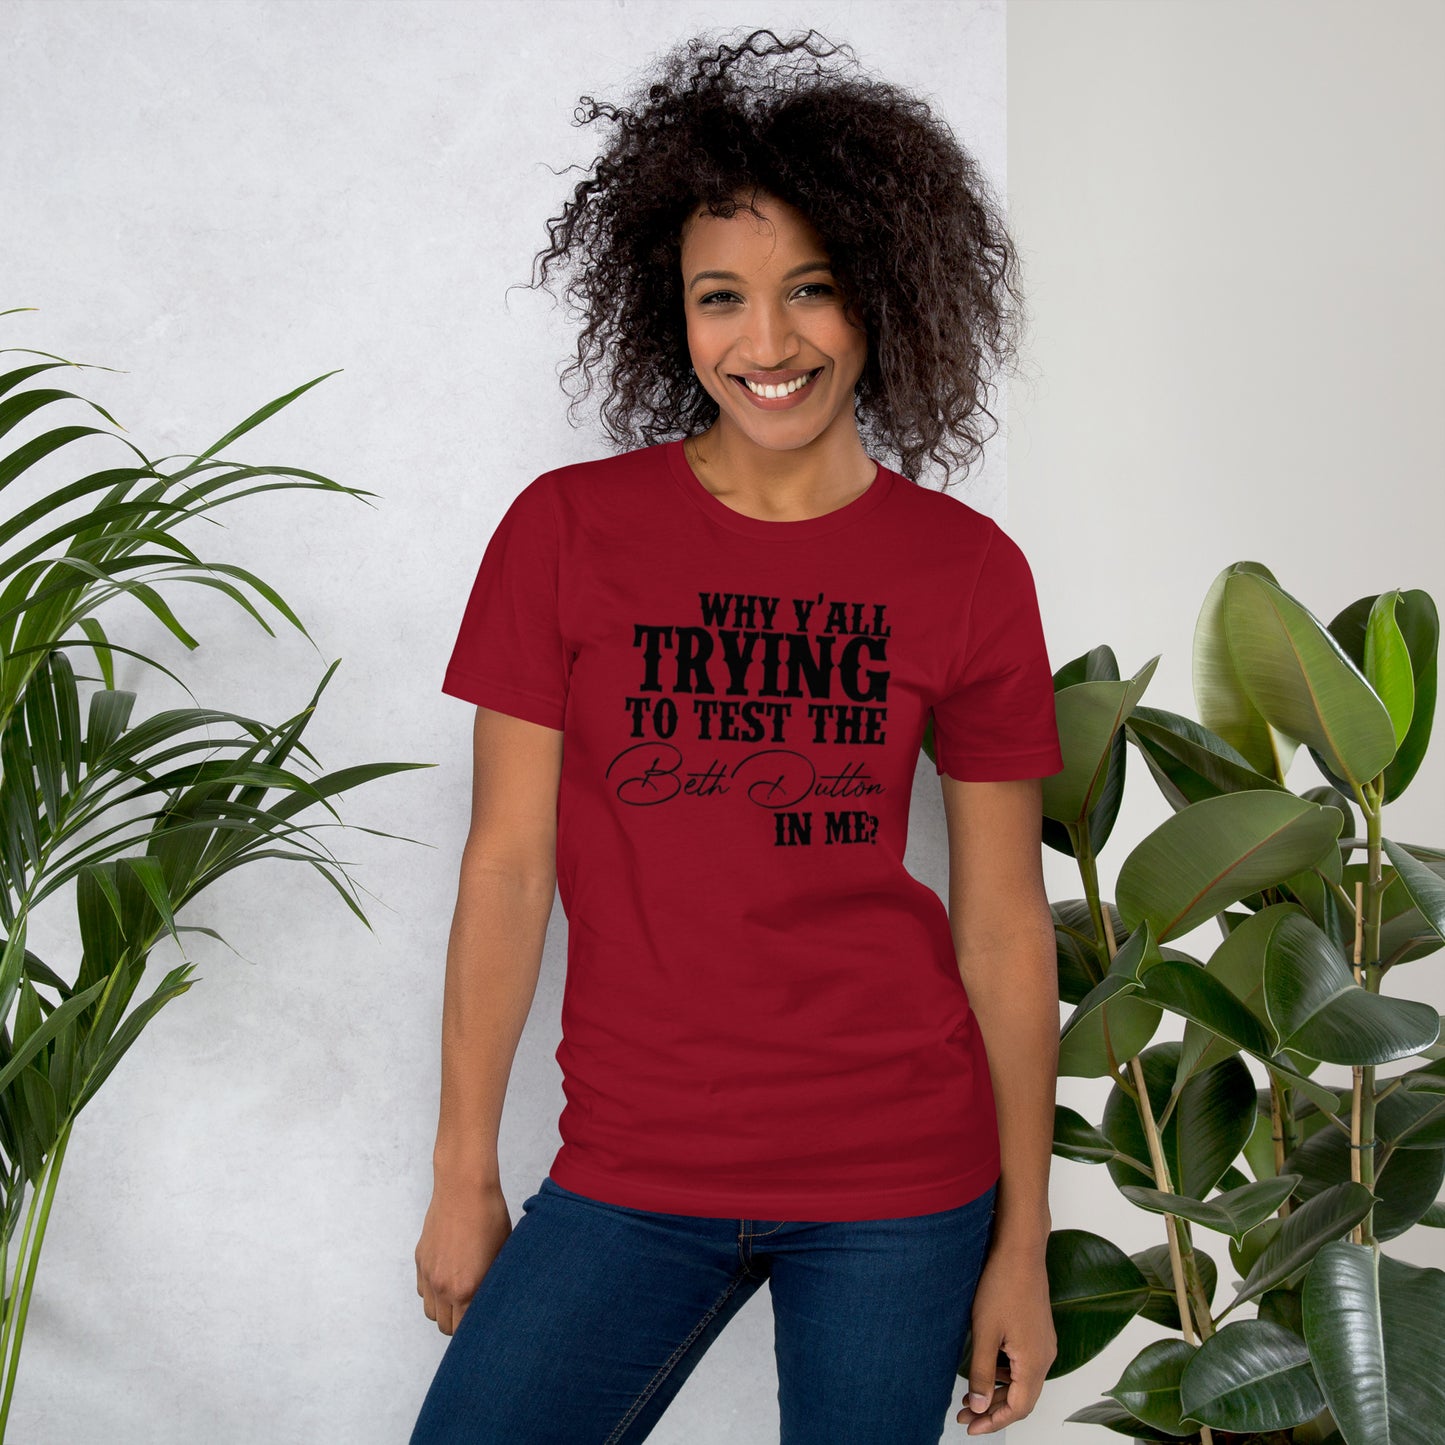 Why Y'all Trying - Get Your Twang On with Classic Country Tees - The Ultimate Unisex T-Shirt for True Country Souls! - Classic Country Tees